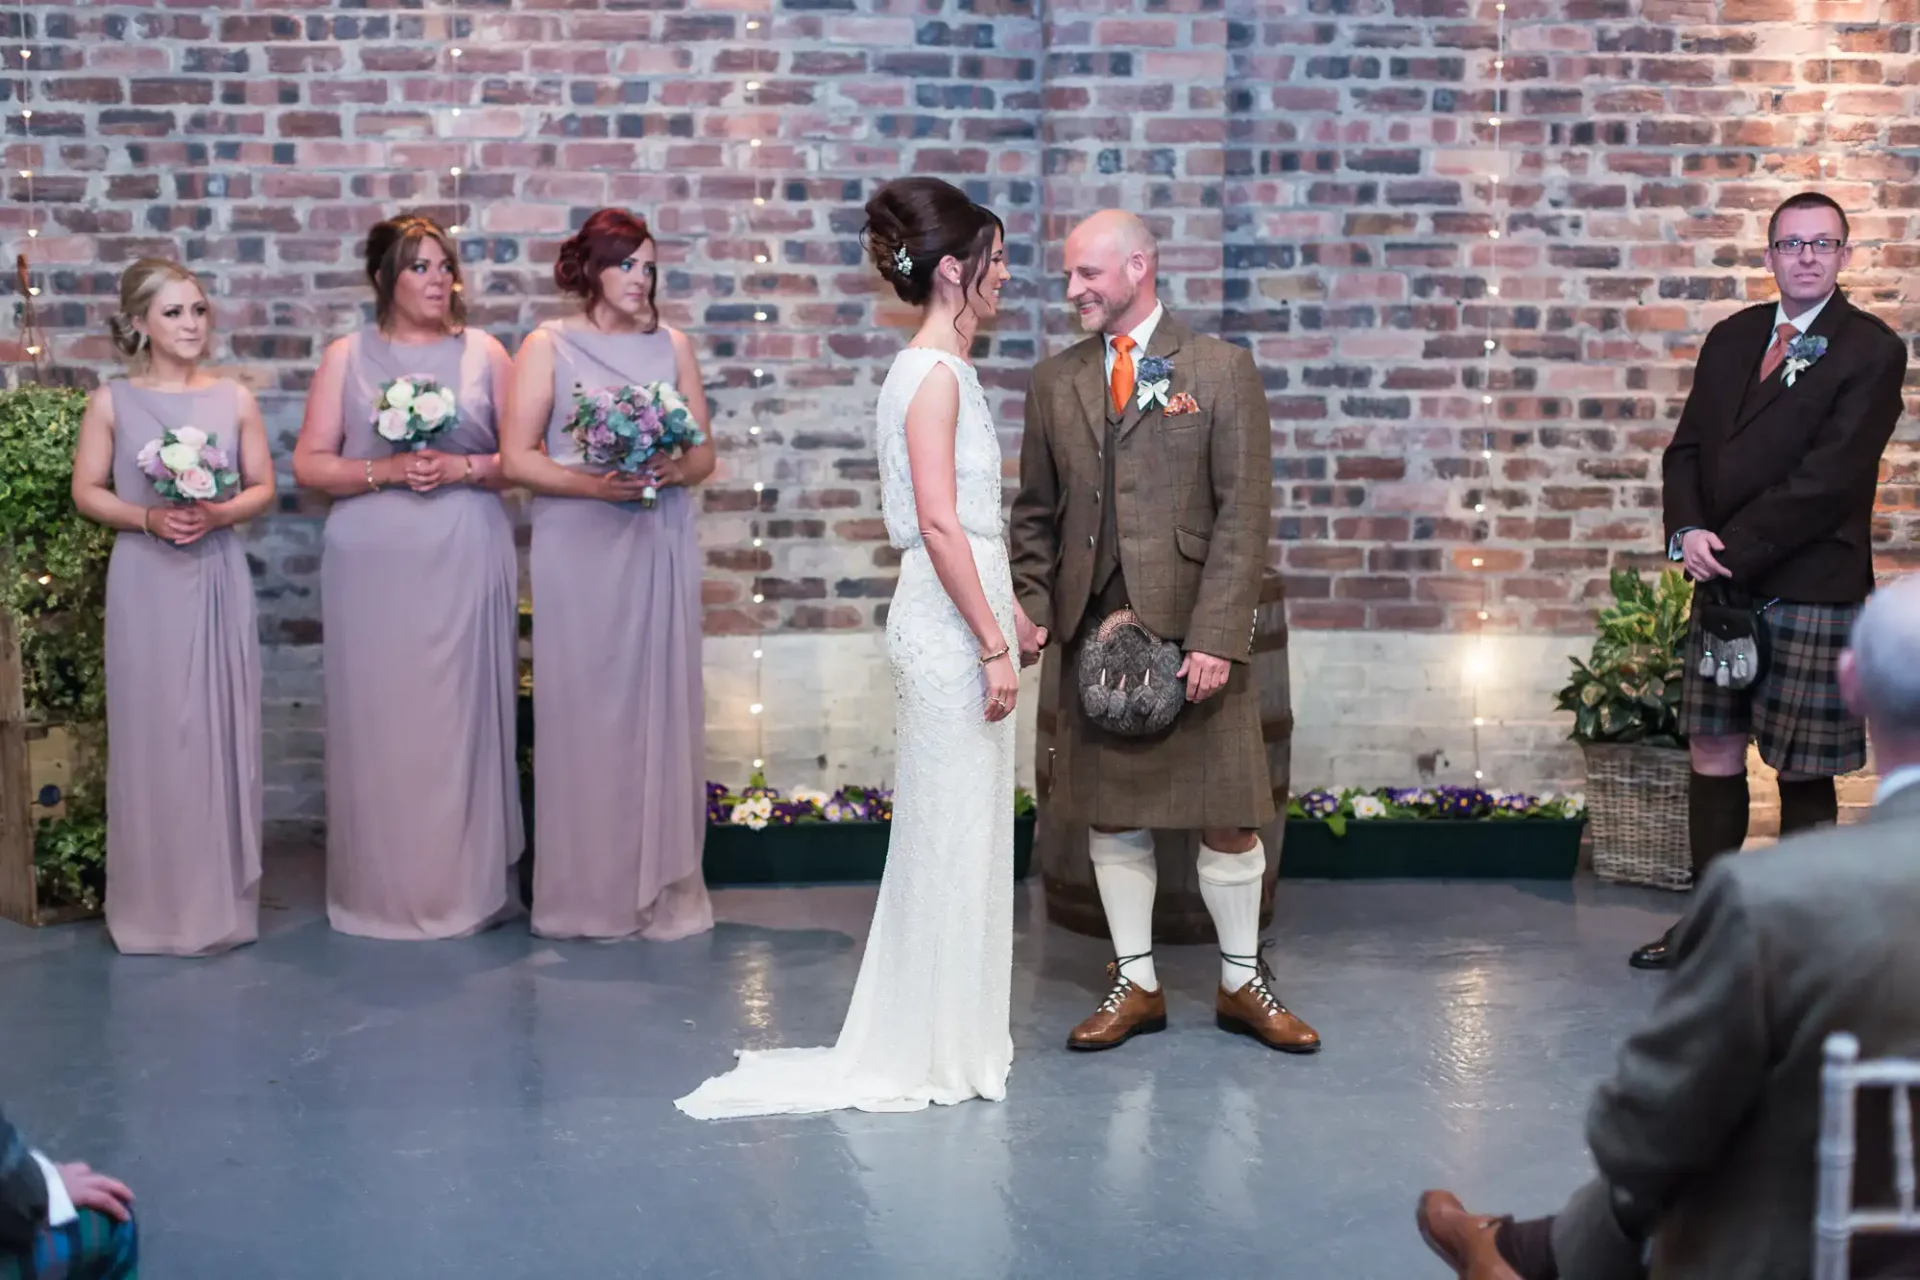 A bride and groom face each other smiling, surrounded by bridesmaids in pastel dresses and a best man in a kilt, in a venue with brick walls.